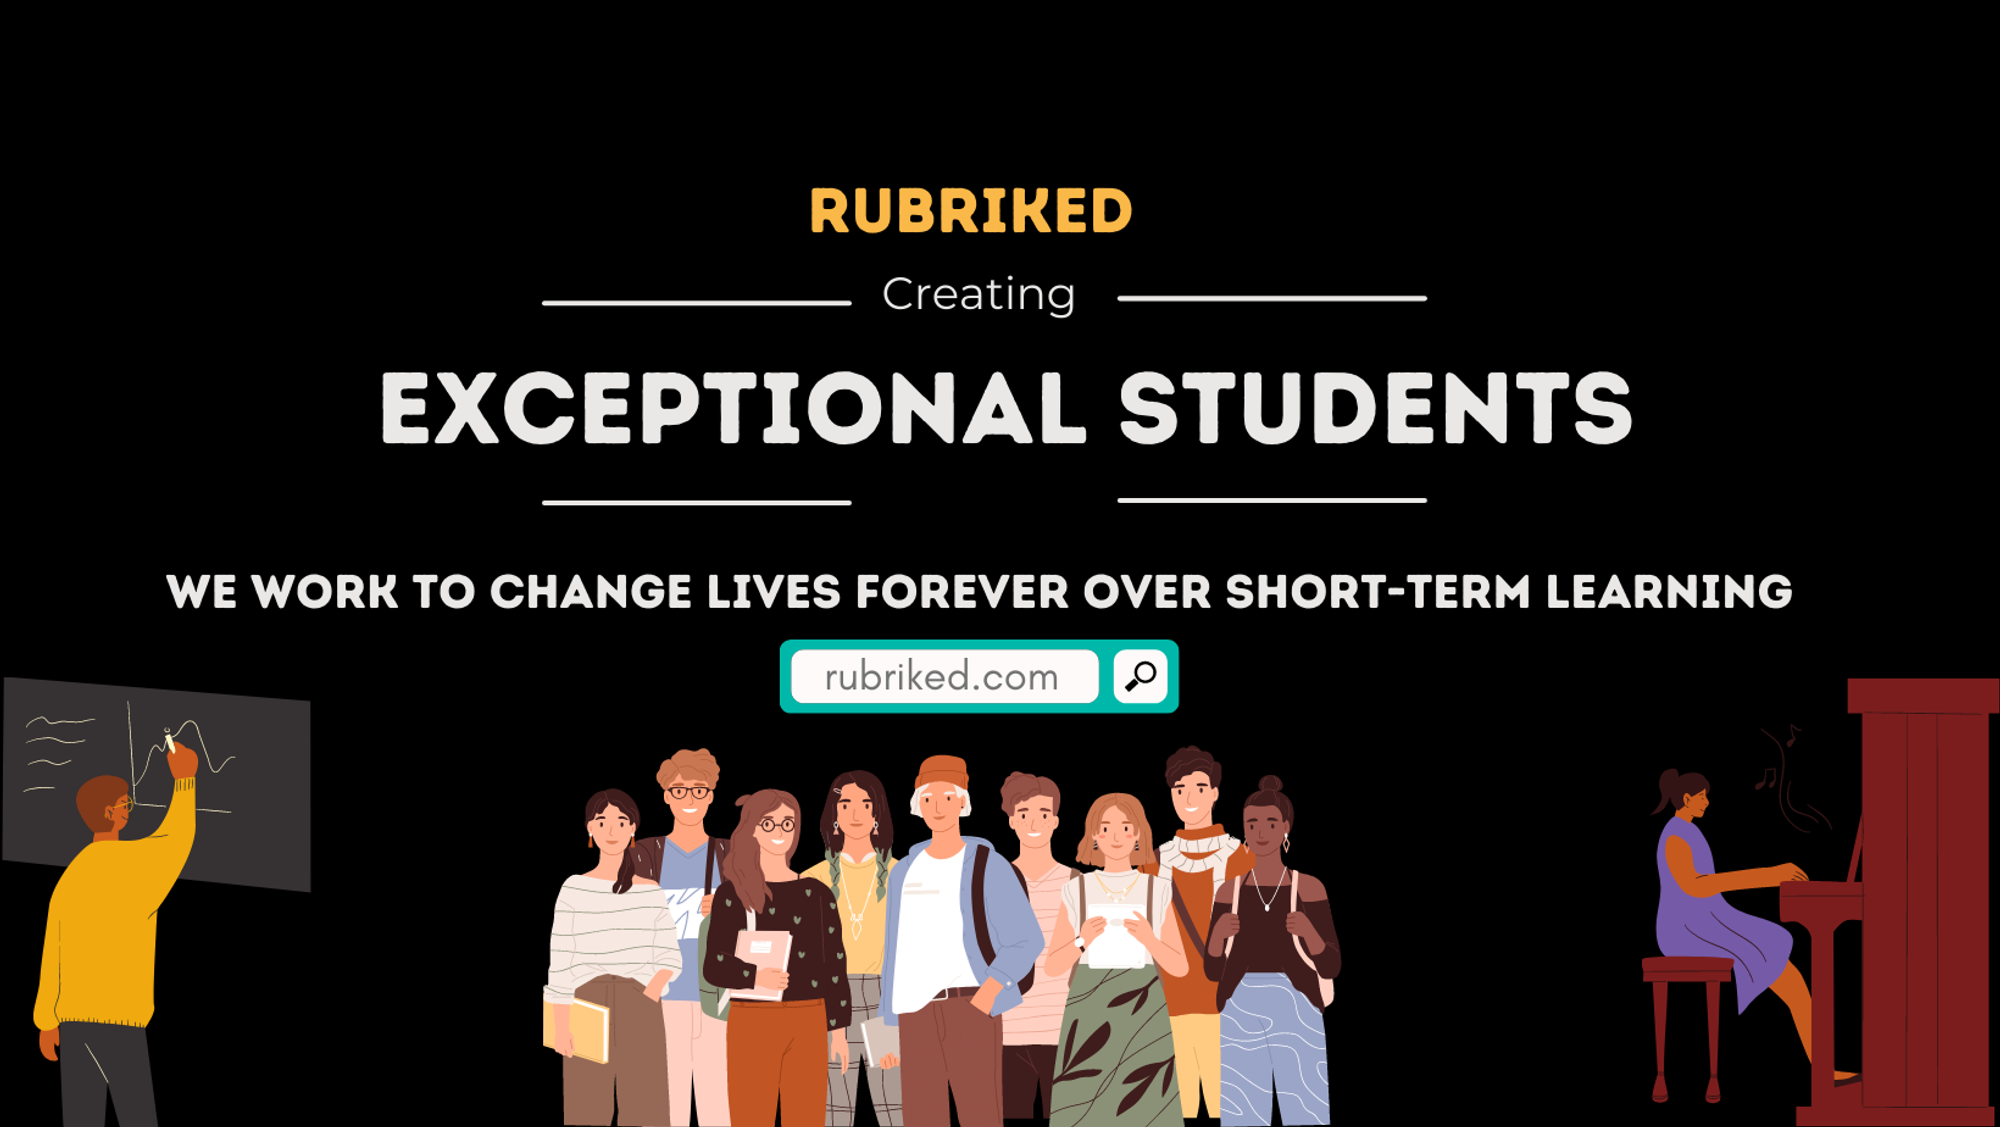 Rubriked: Your turn to make headlines